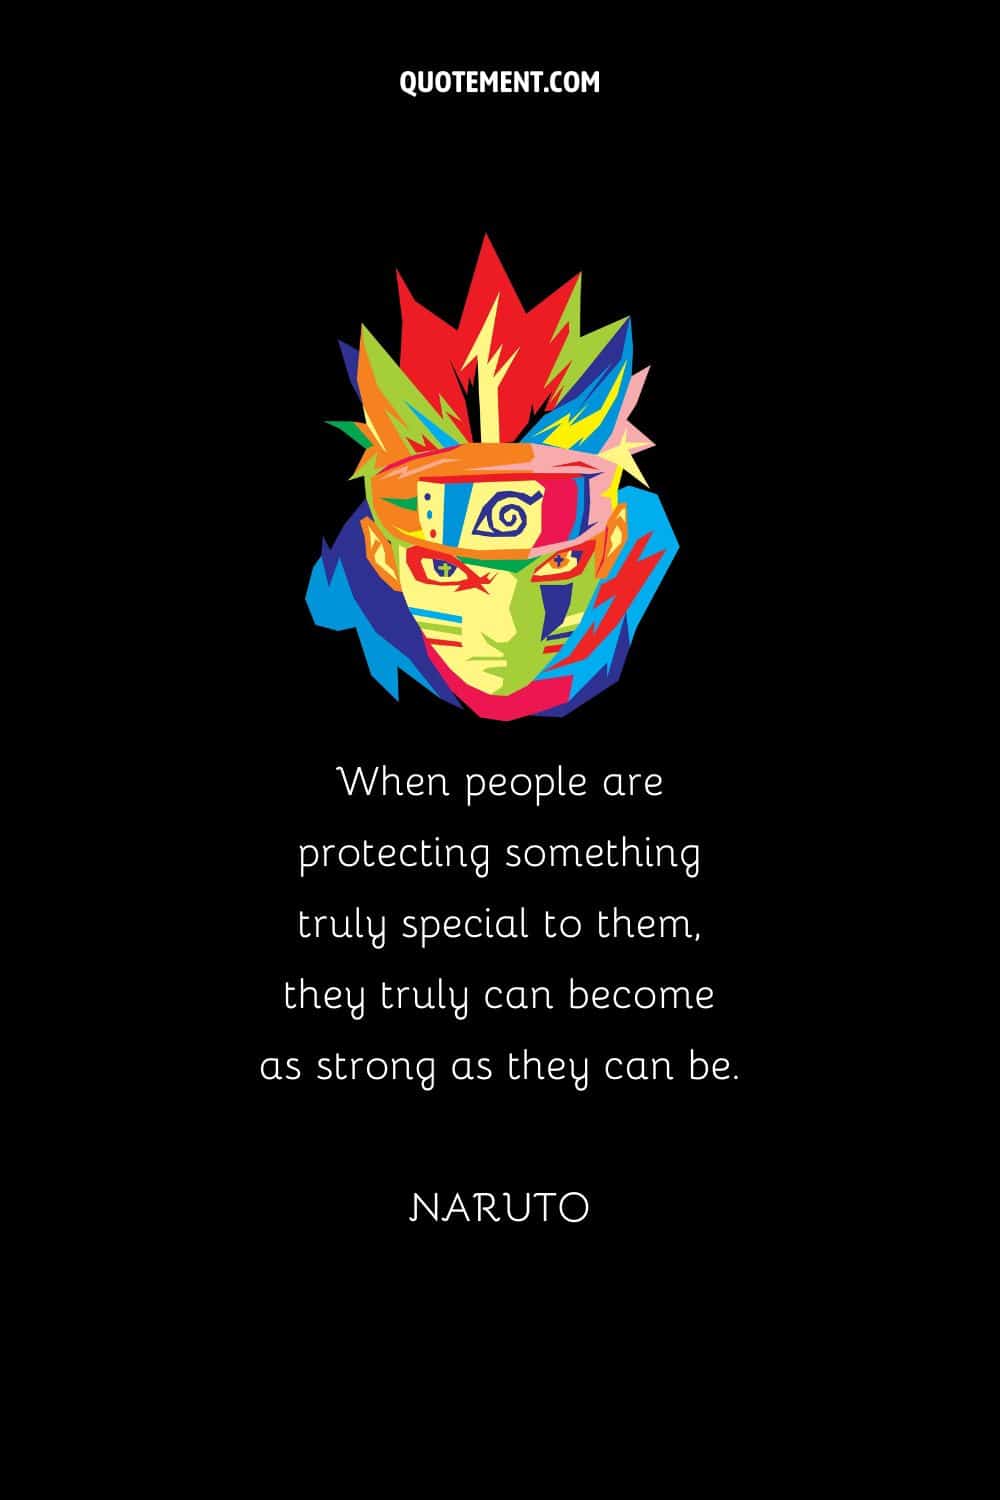 “When people are protecting something truly special to them, they truly can become as strong as they can be.” — Naruto